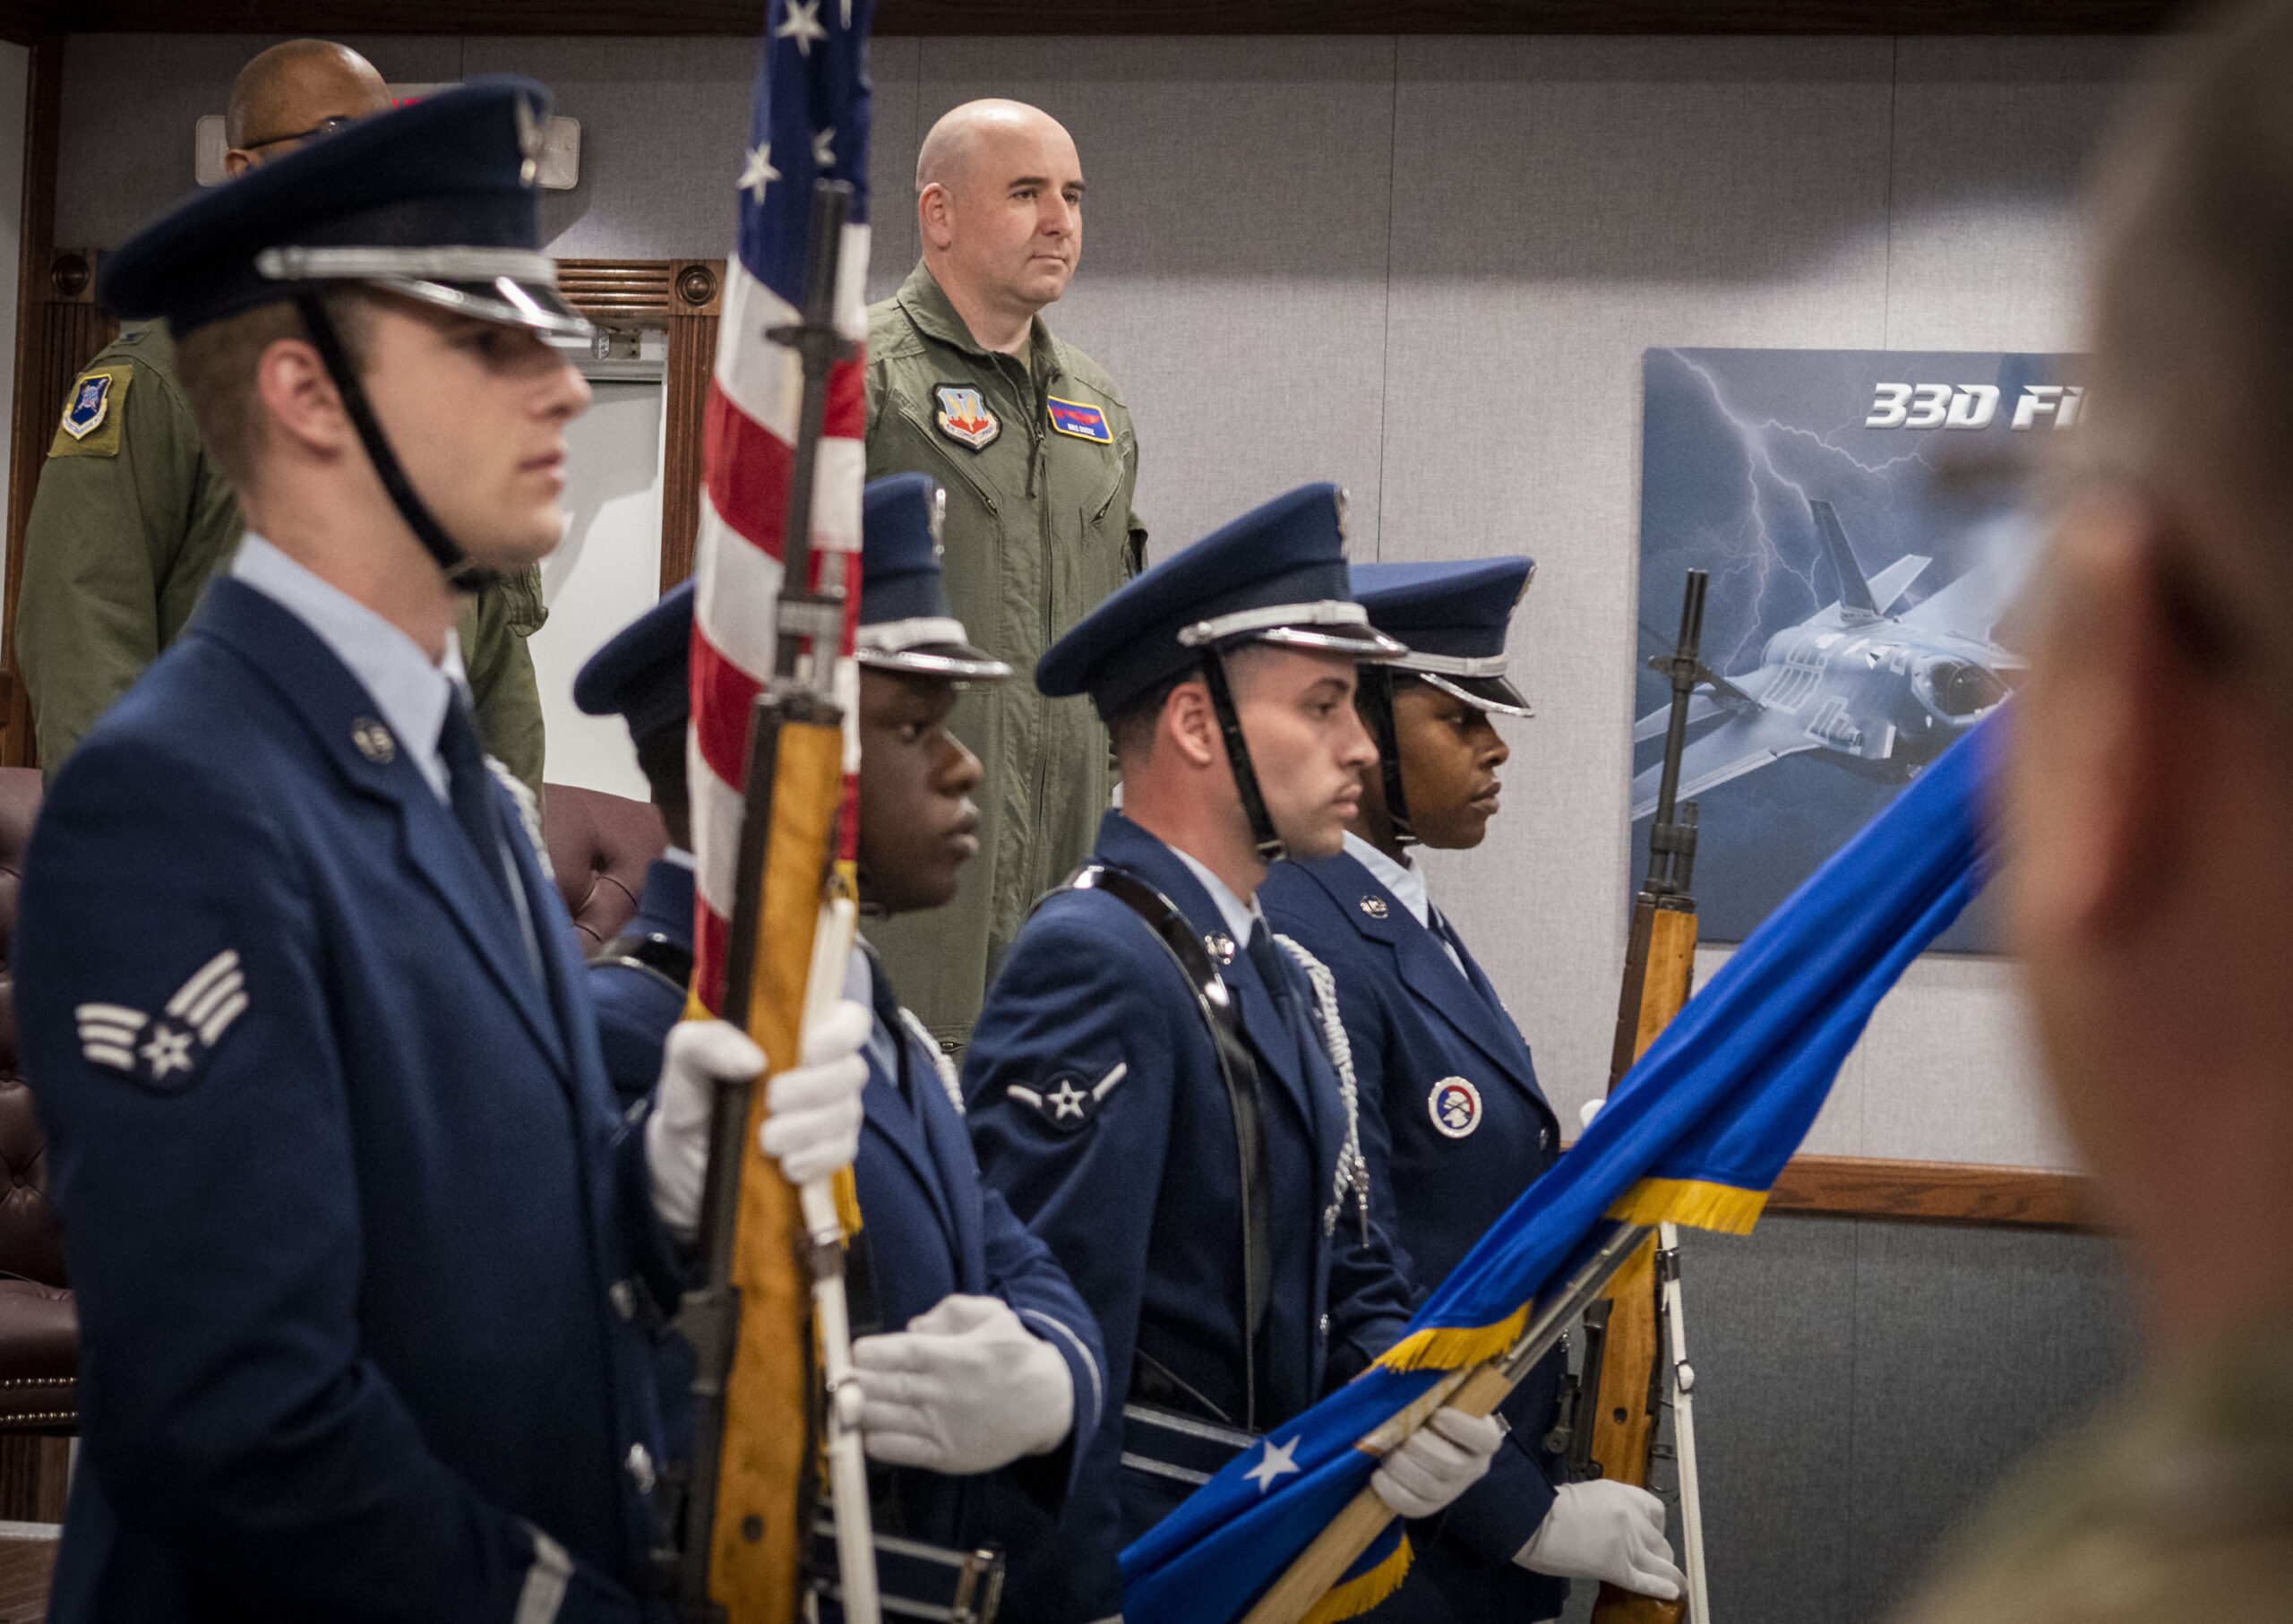 Col. Robert Cocke stands at attention for the national anthem during the 350th Spectrum Warfare Group assumption of command ceremony at Eglin Air Force Base, Fla. March 18, 2022. <em>Credit: Air Force photo by Jaime Bishopp</em>